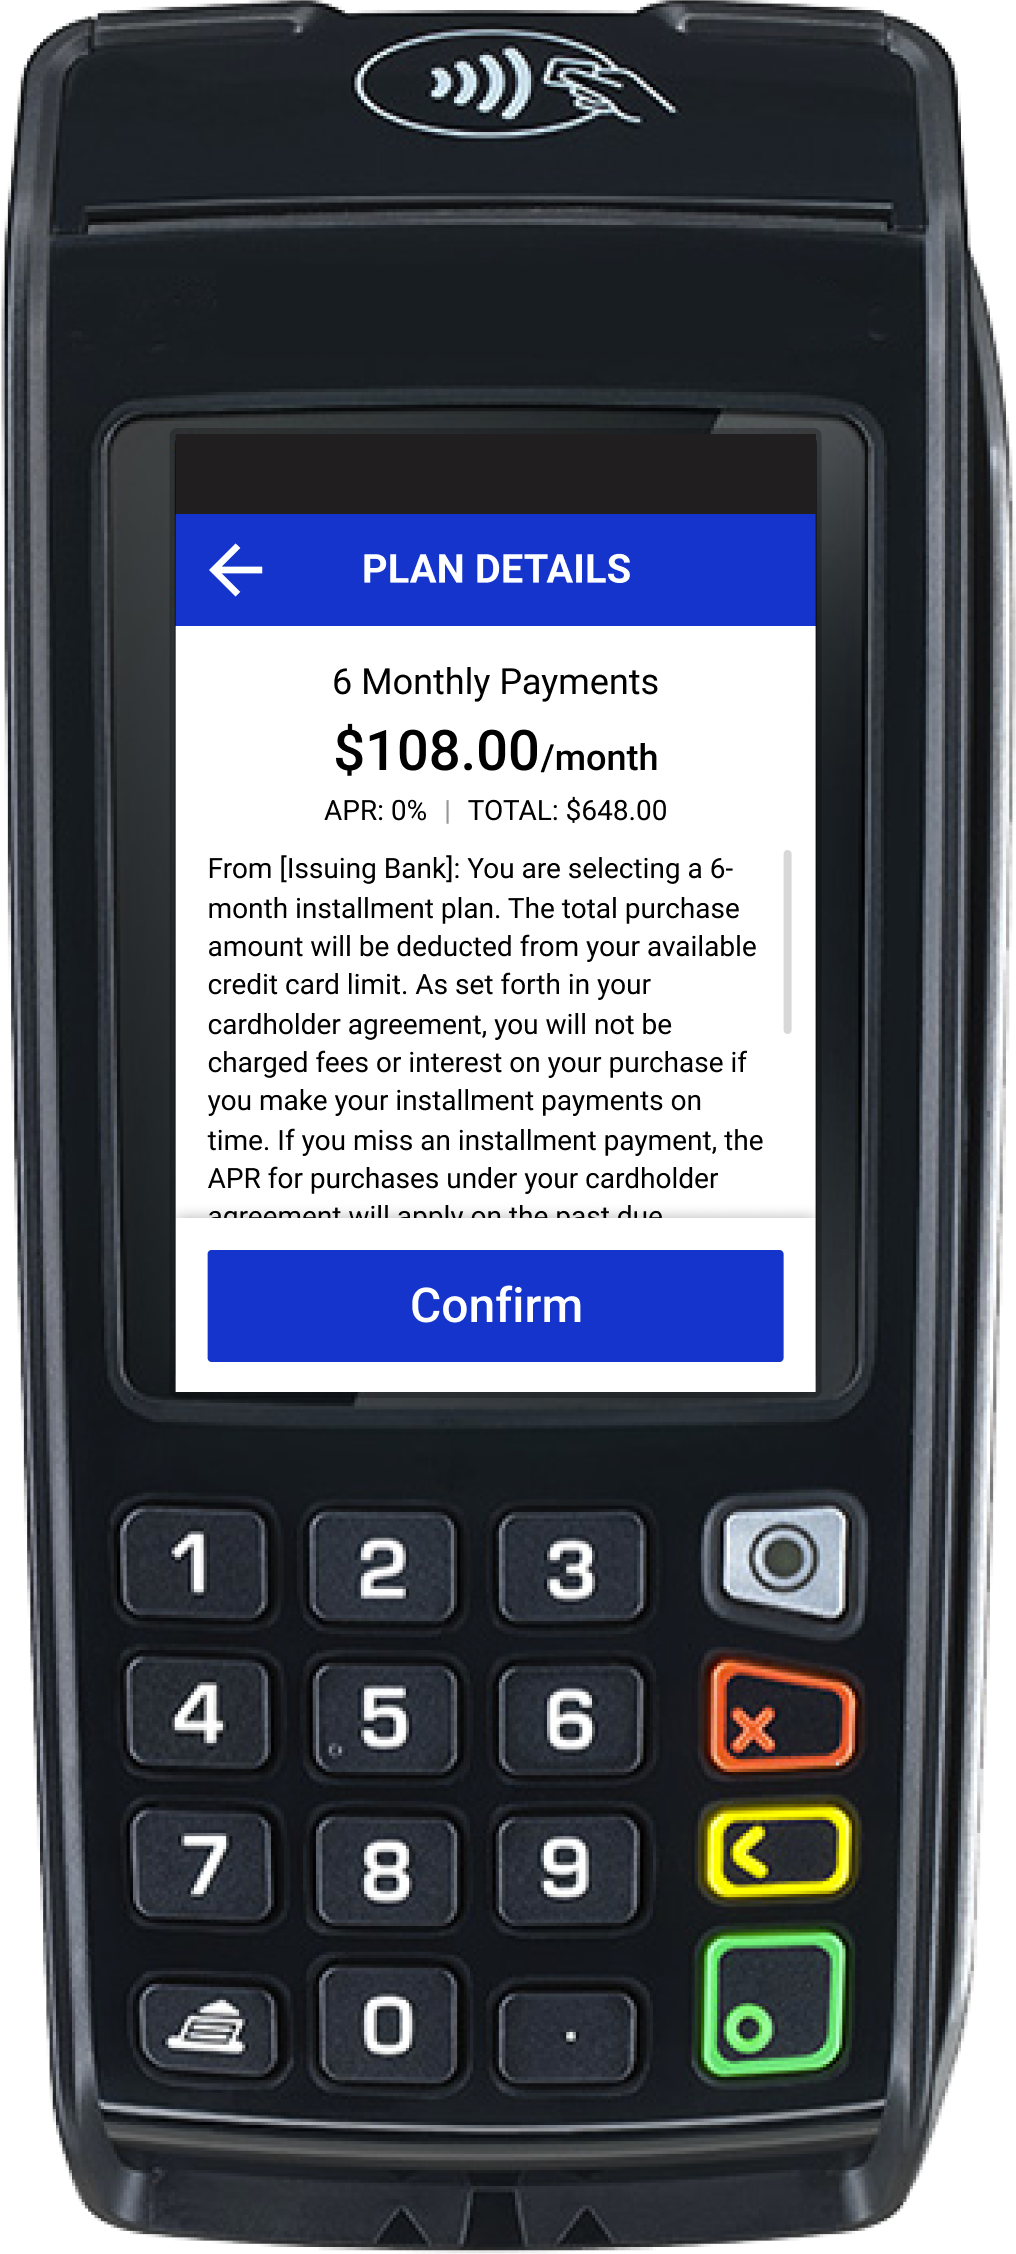 United States portrait 2 style payment terminal, review terms and conditions